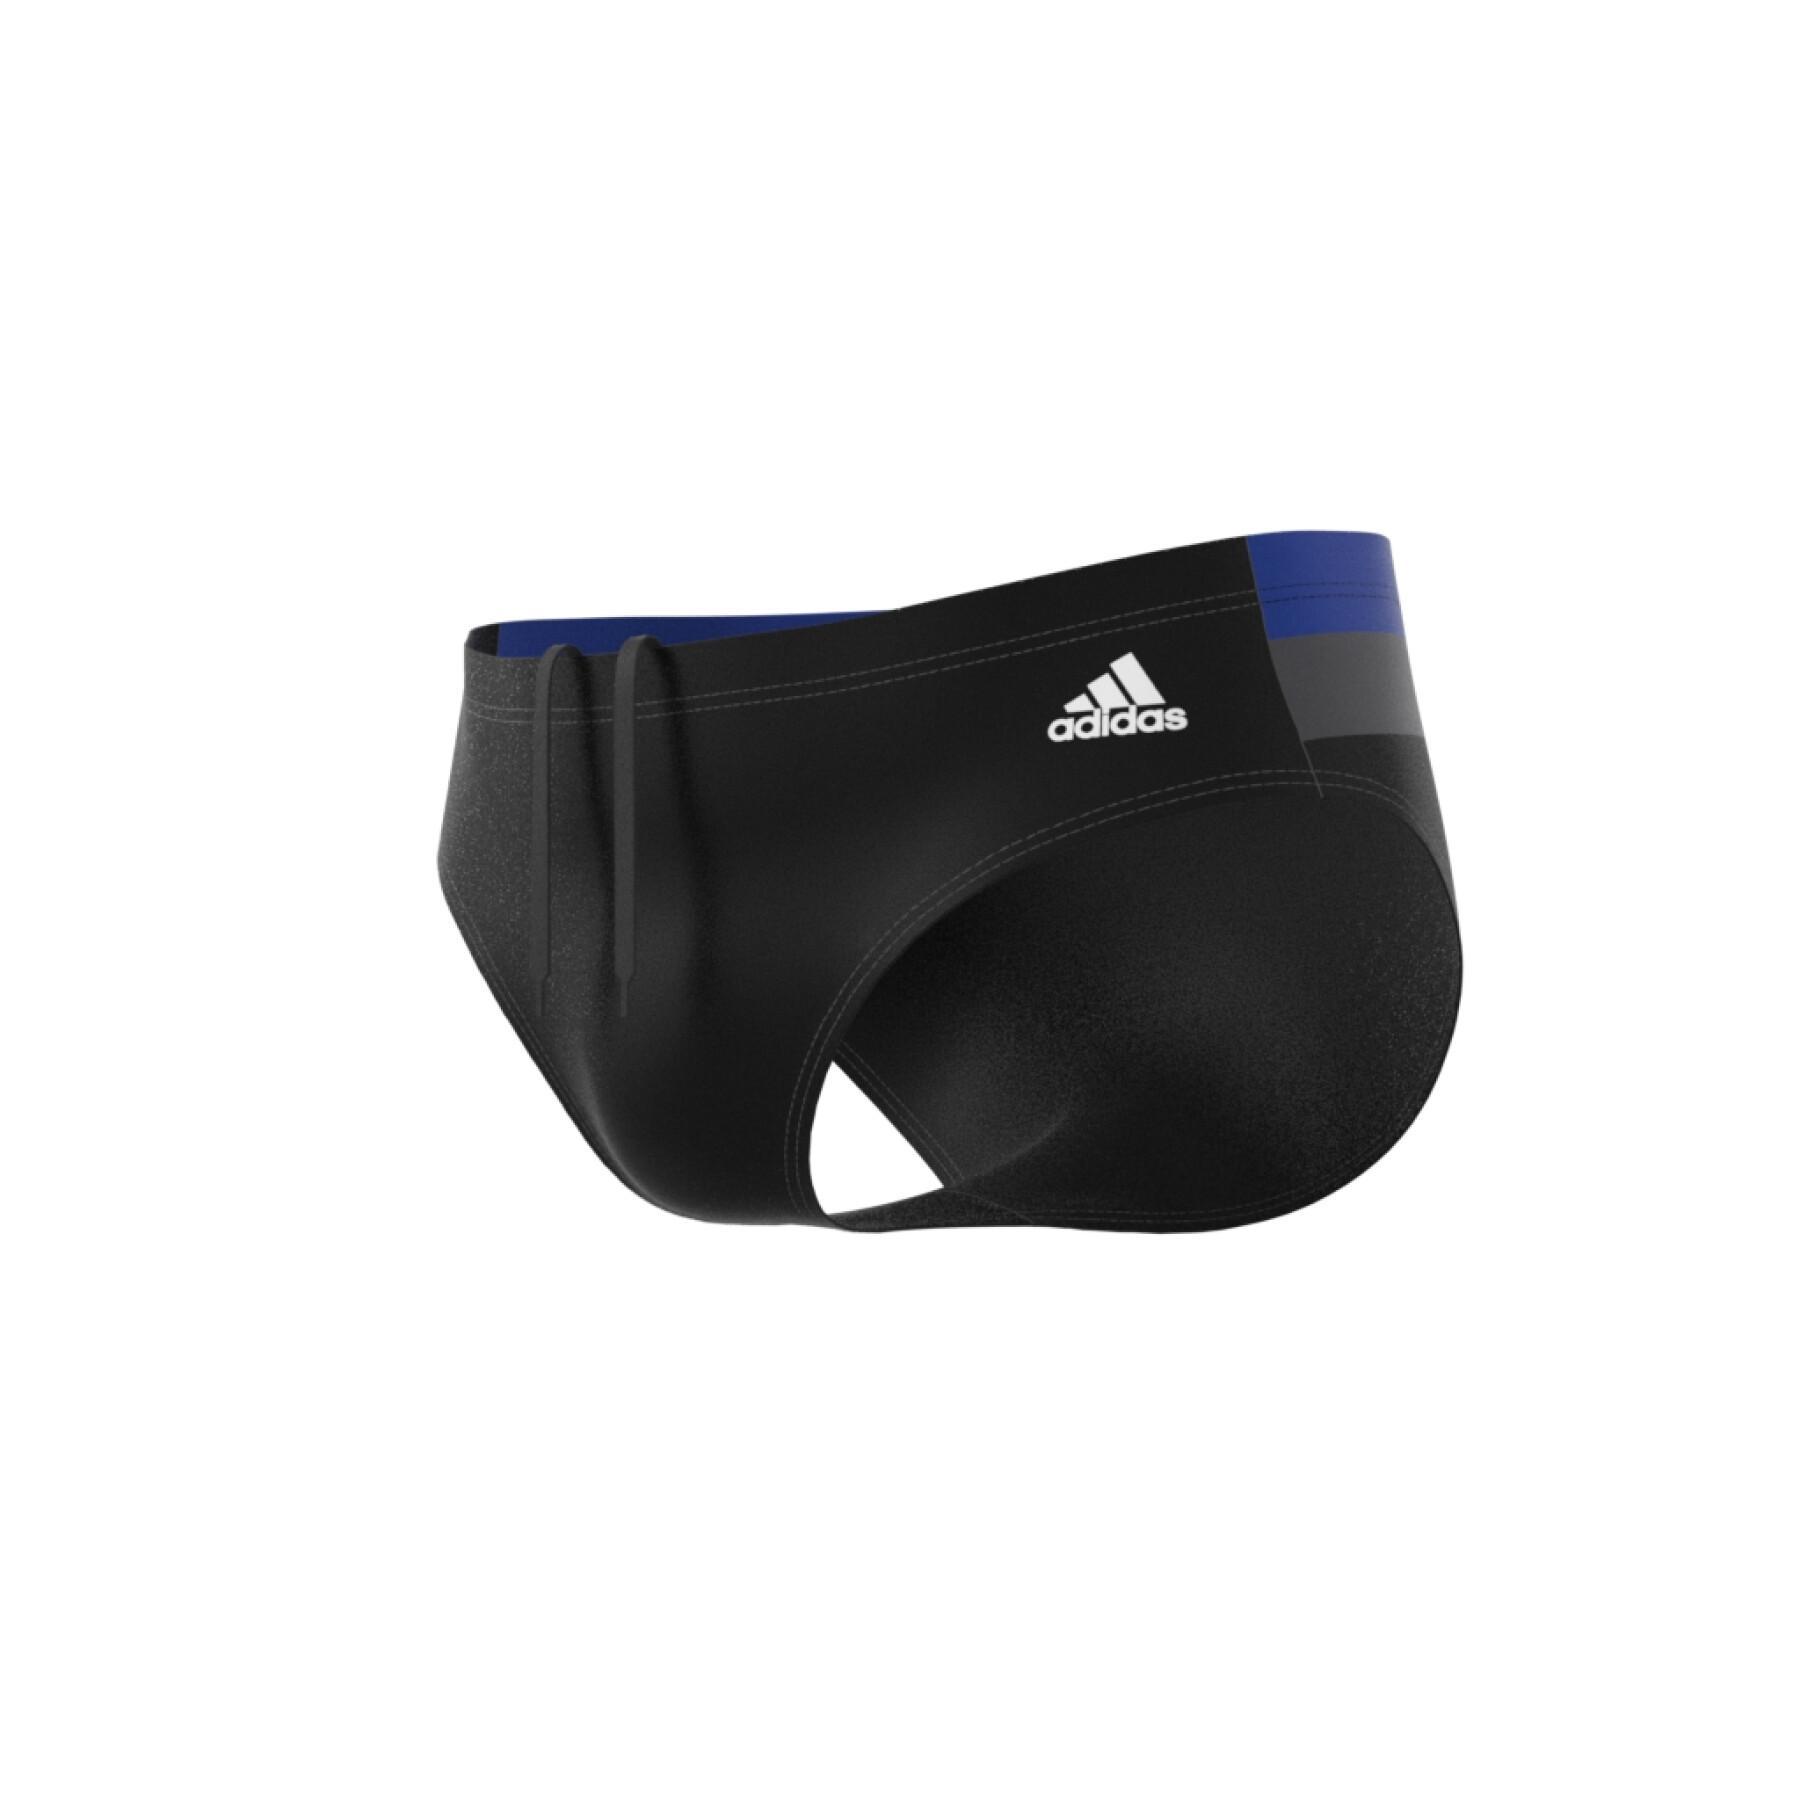 Bathing suit adidas Colorblock - Swimming - Fitness